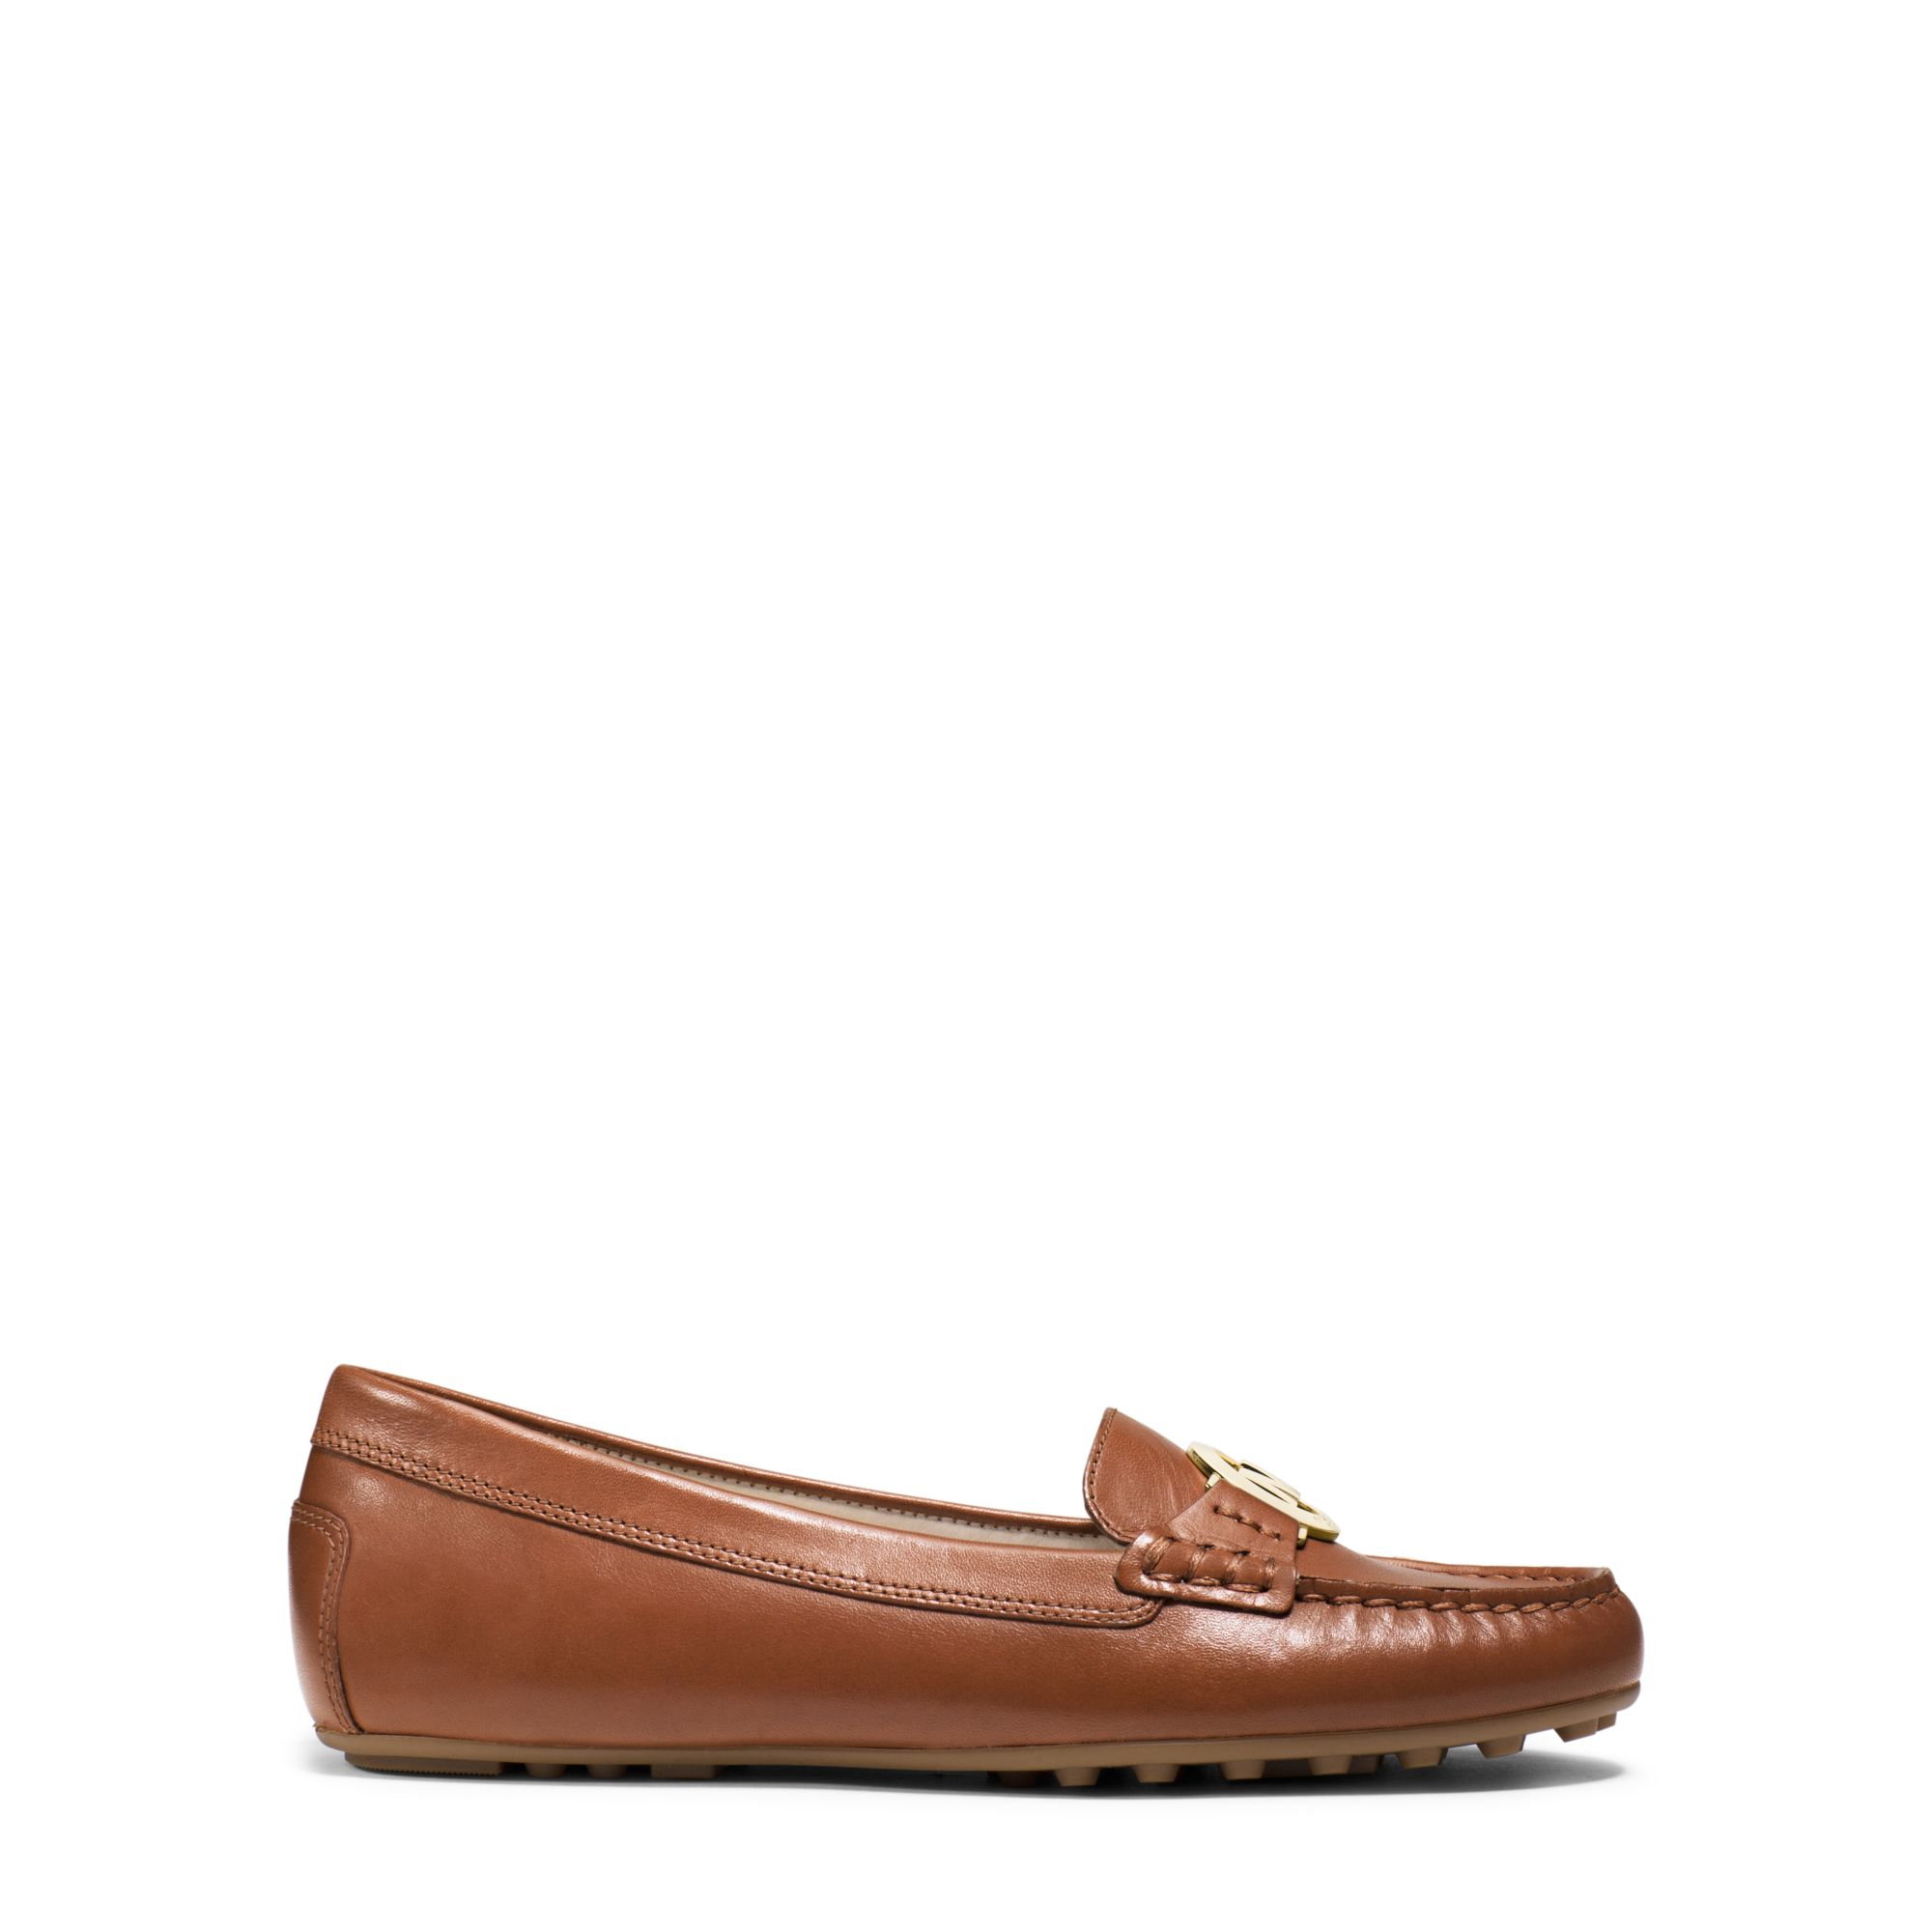 Michael kors Molly Leather Loafer in Brown (LUGGAGE) | Lyst